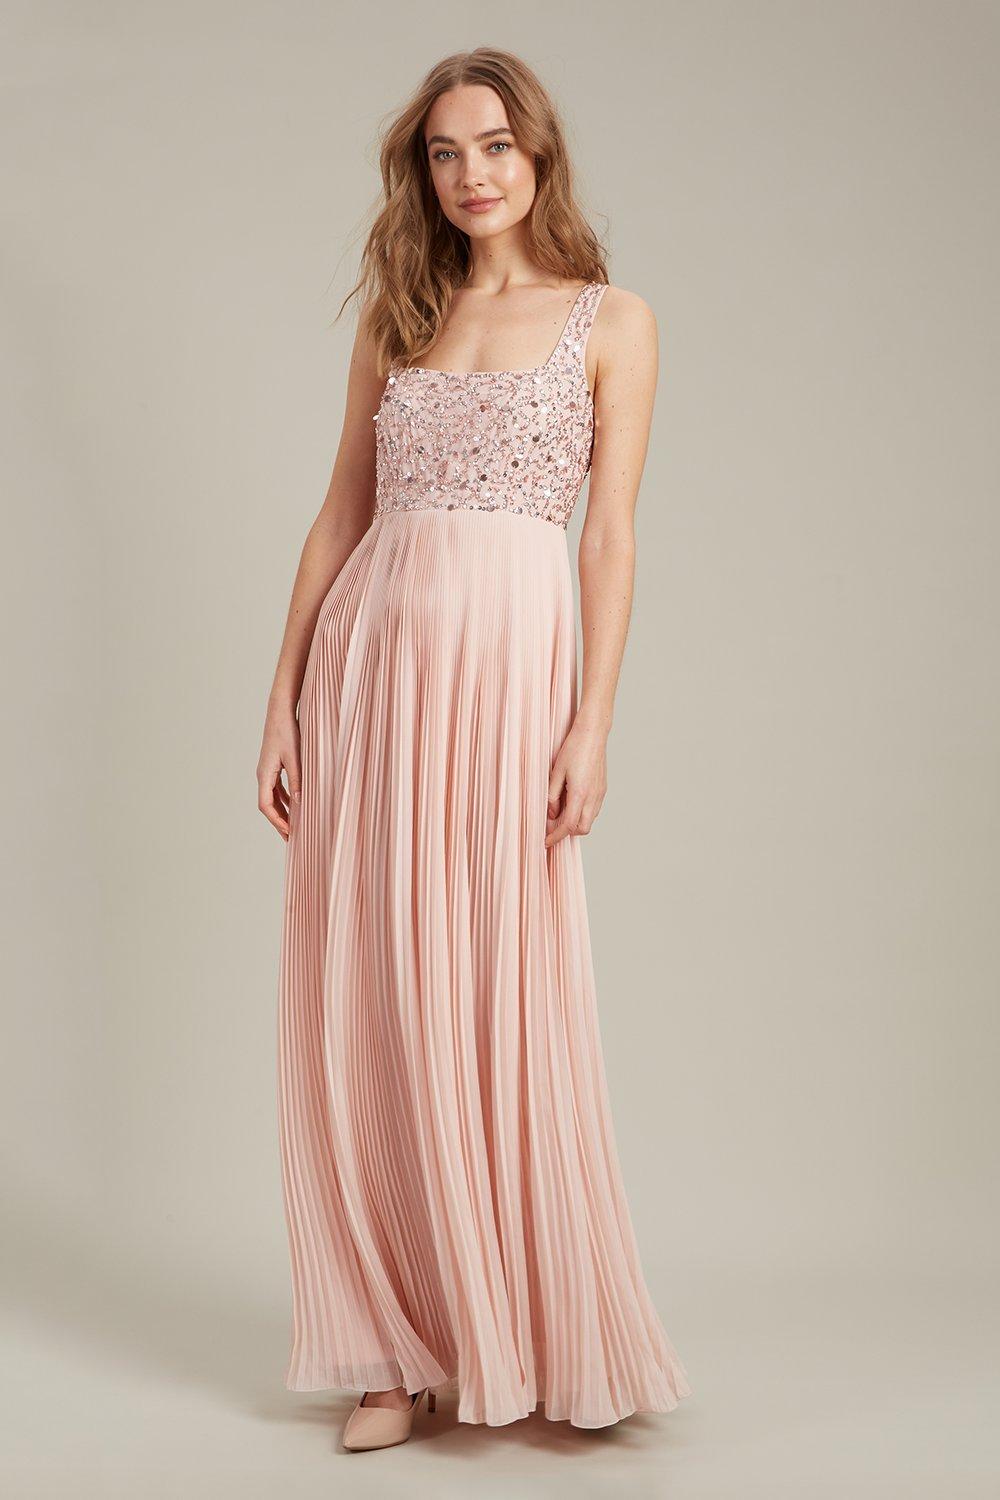 Women’s Square Neck Embellished Pleated Maxi Dress - peach - 16